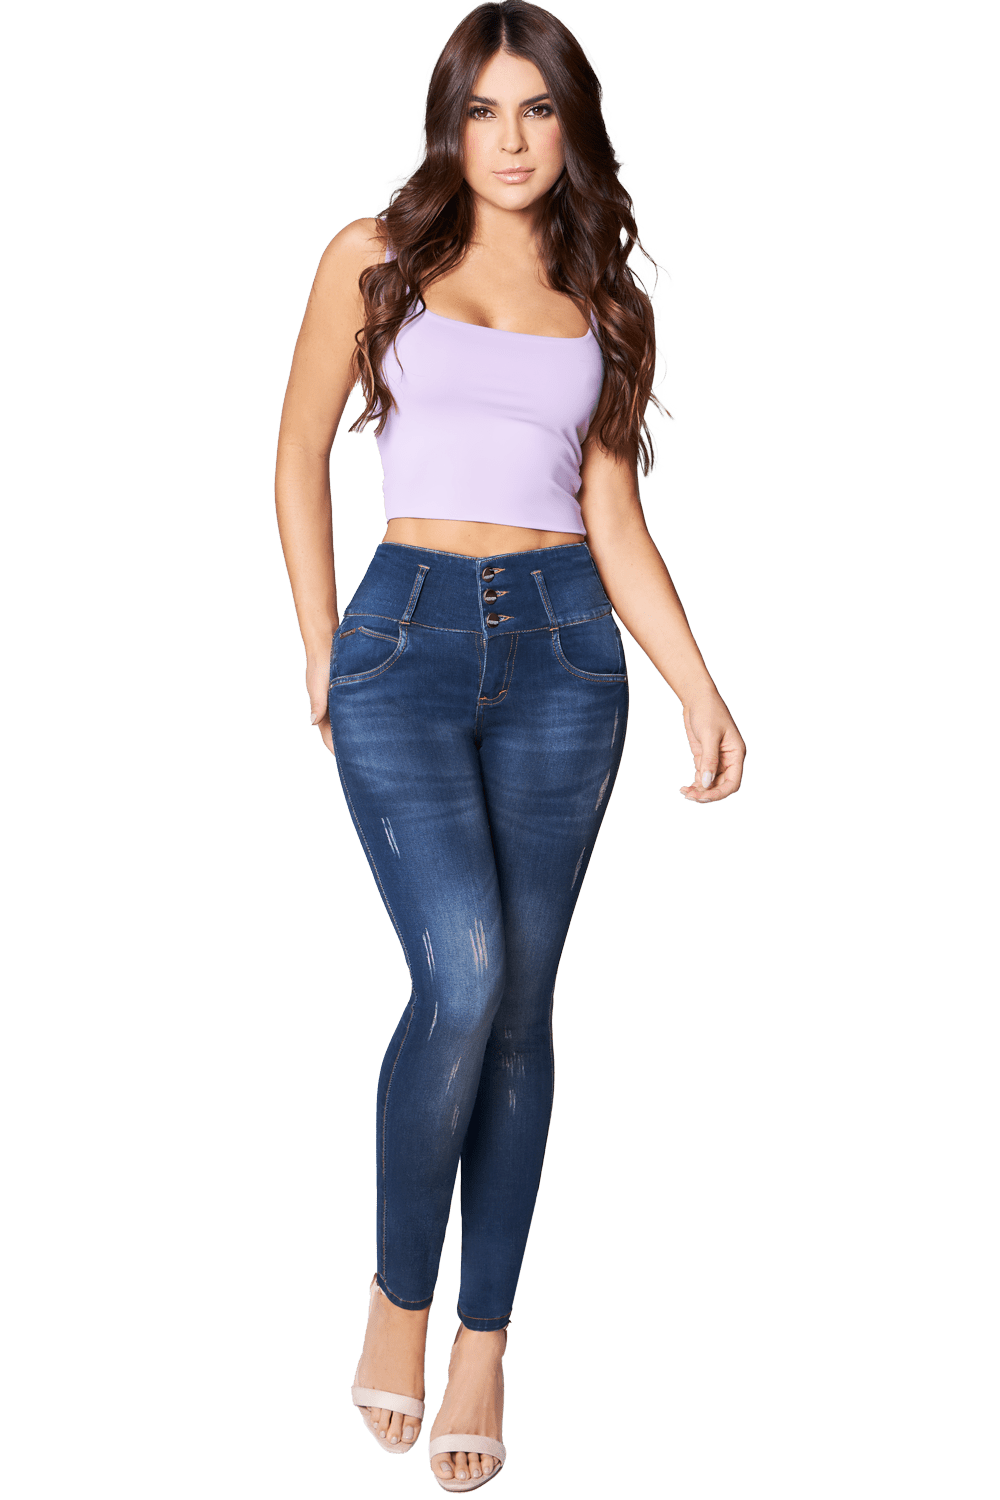 Ily Clothing Jeans Colombian Jean